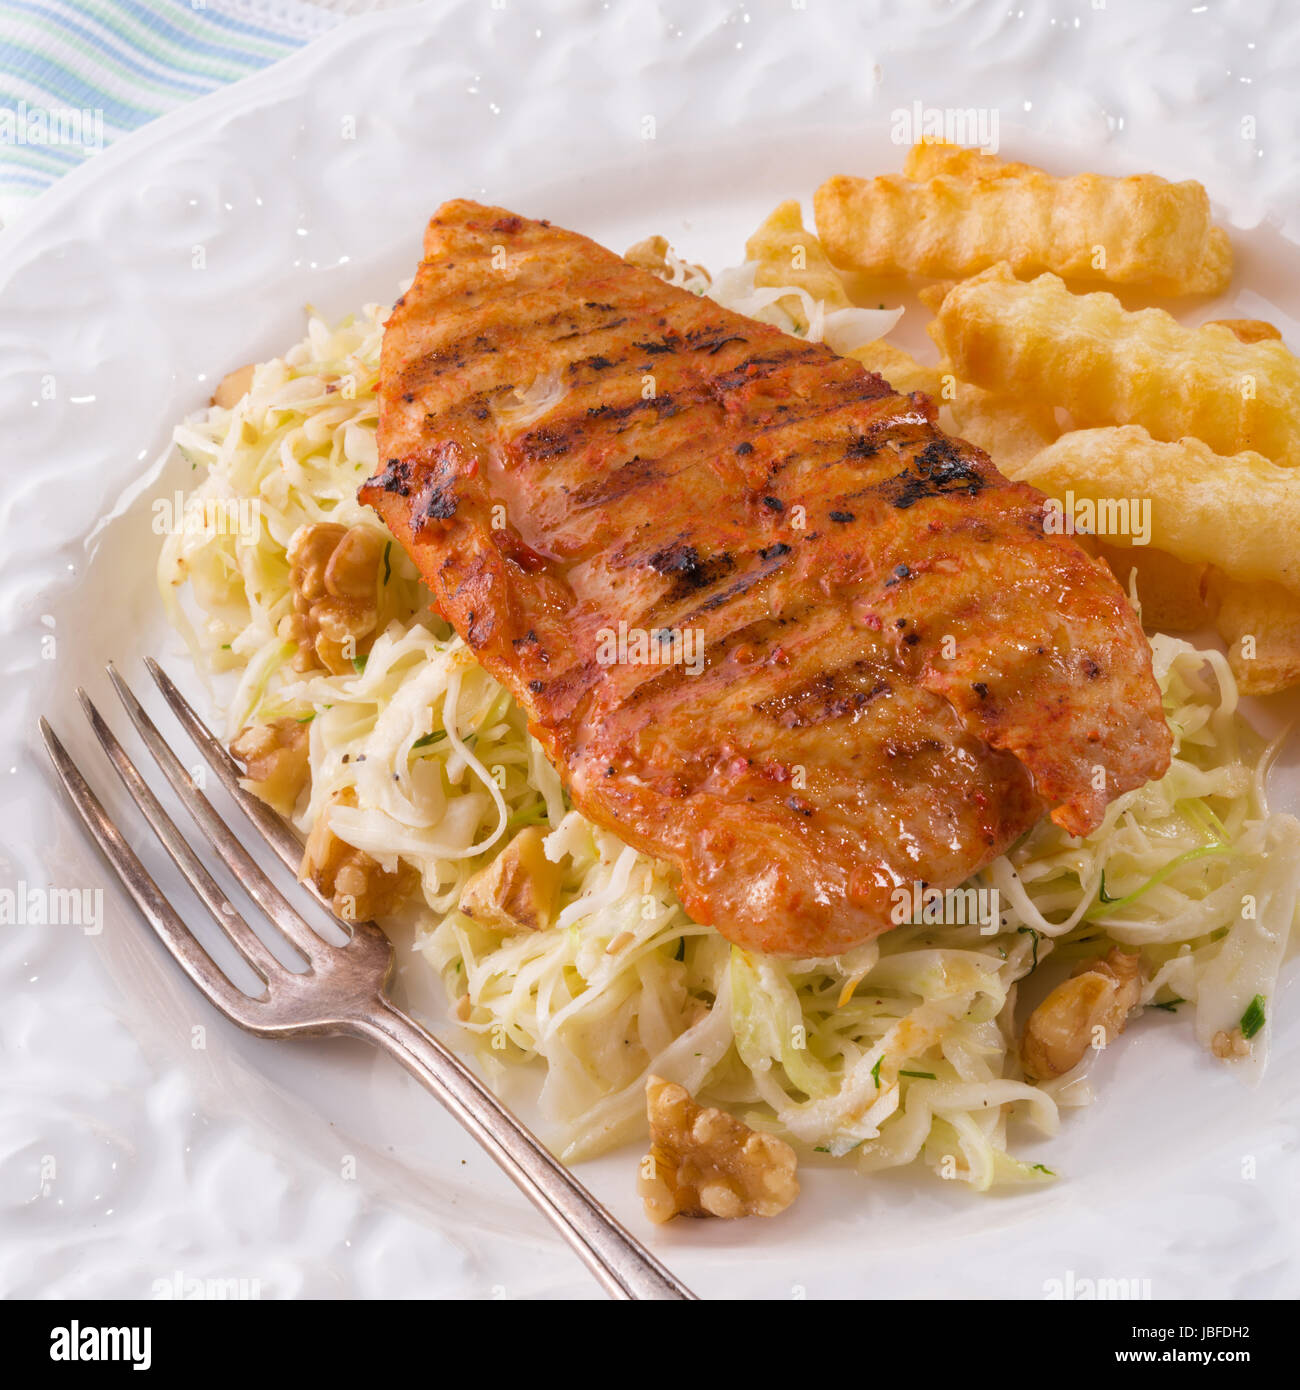 grilled chicken, cabbage salad with nuts and chips Stock Photo